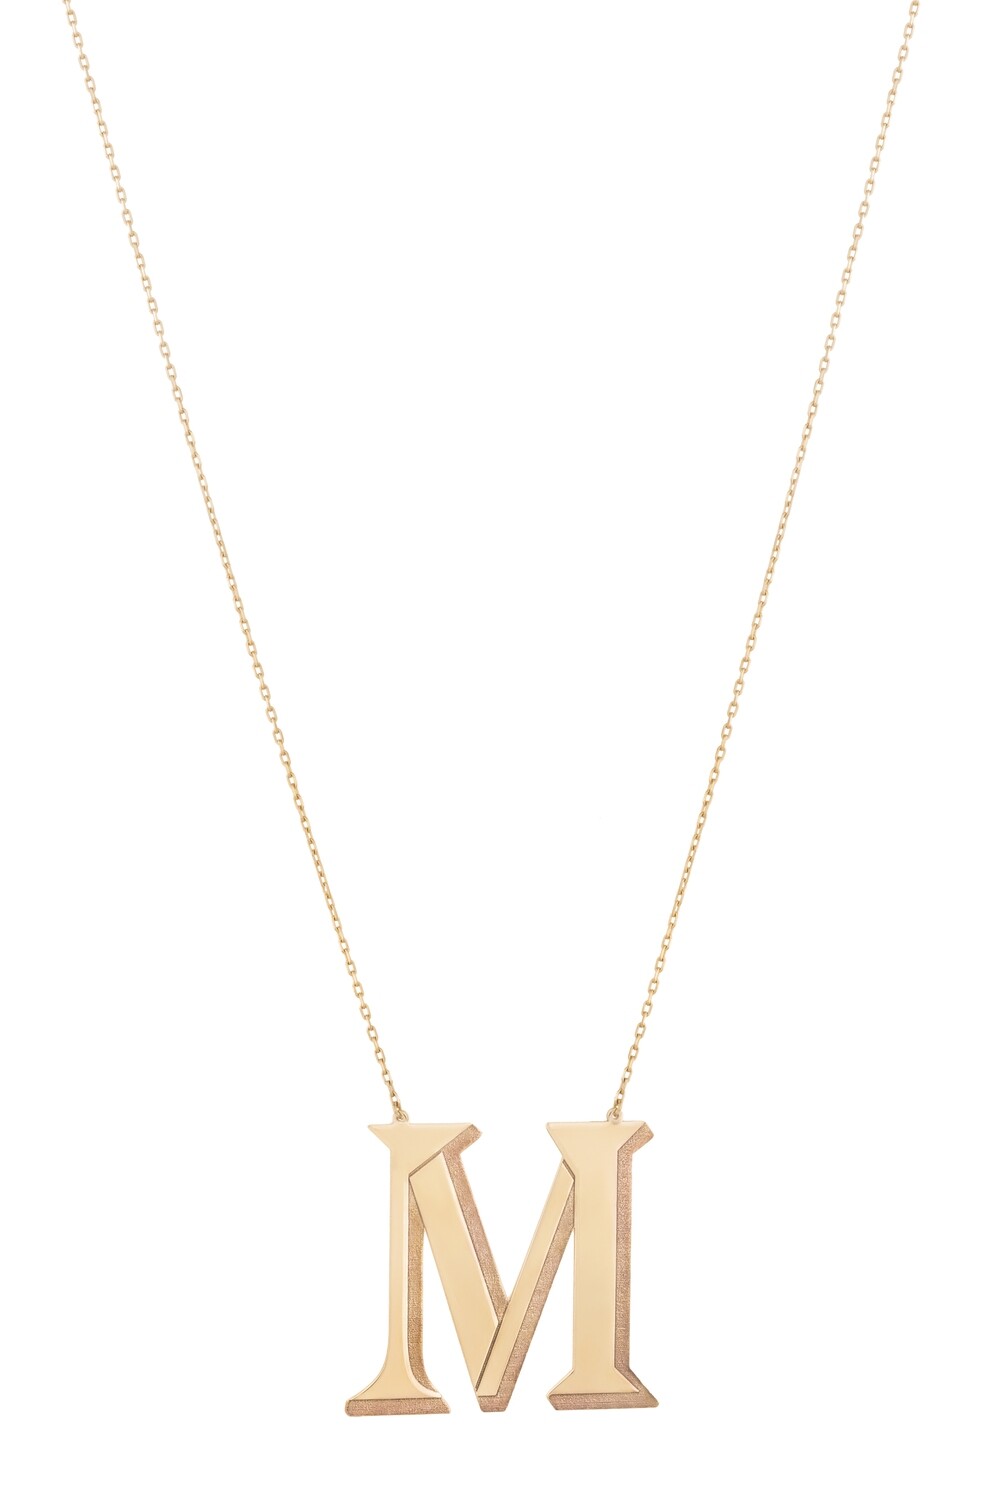 Initials Gold Necklace Letter M